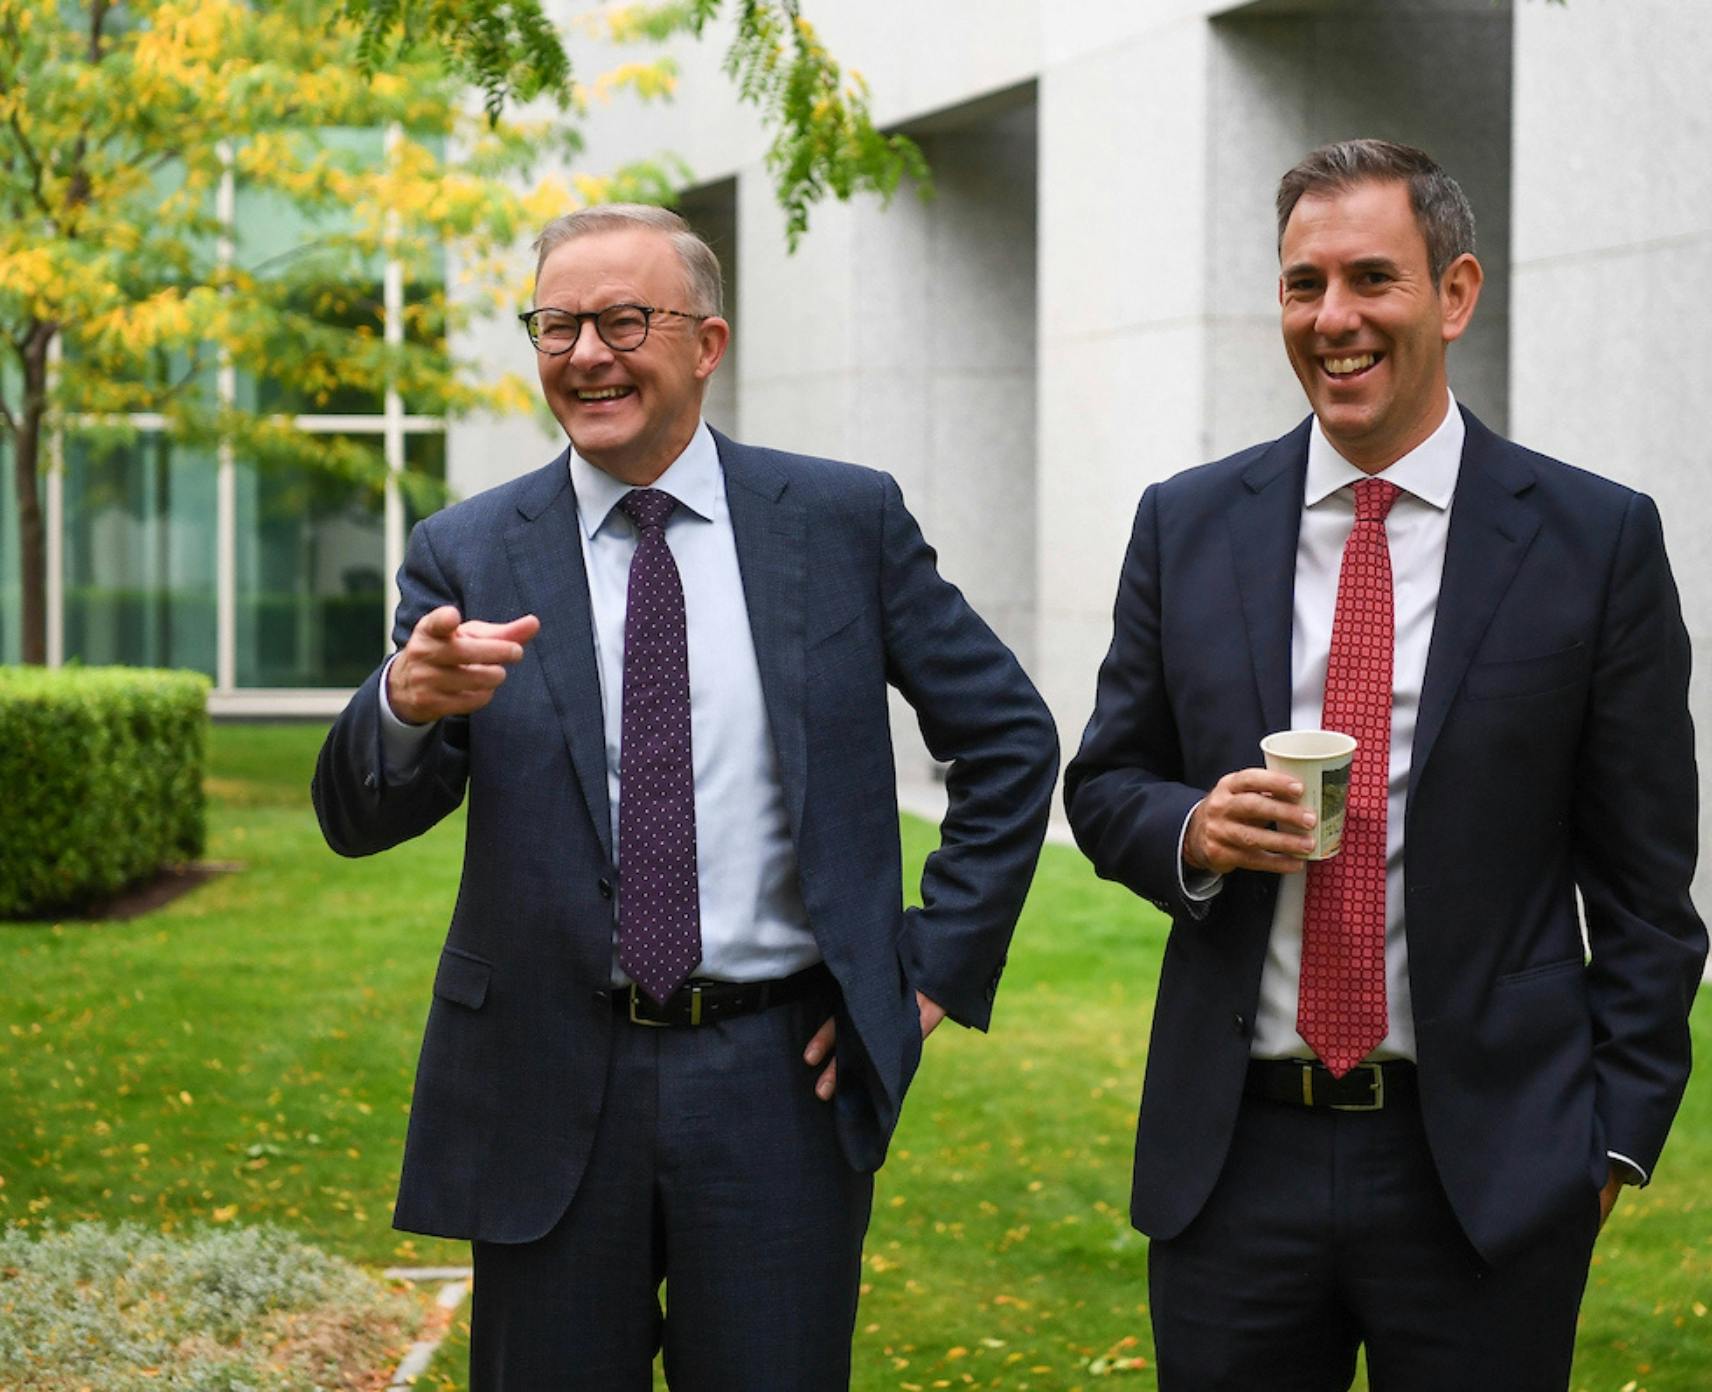 Anthony Albanese and Jim Chalmers standing and smiling in the Parliament House courtyard